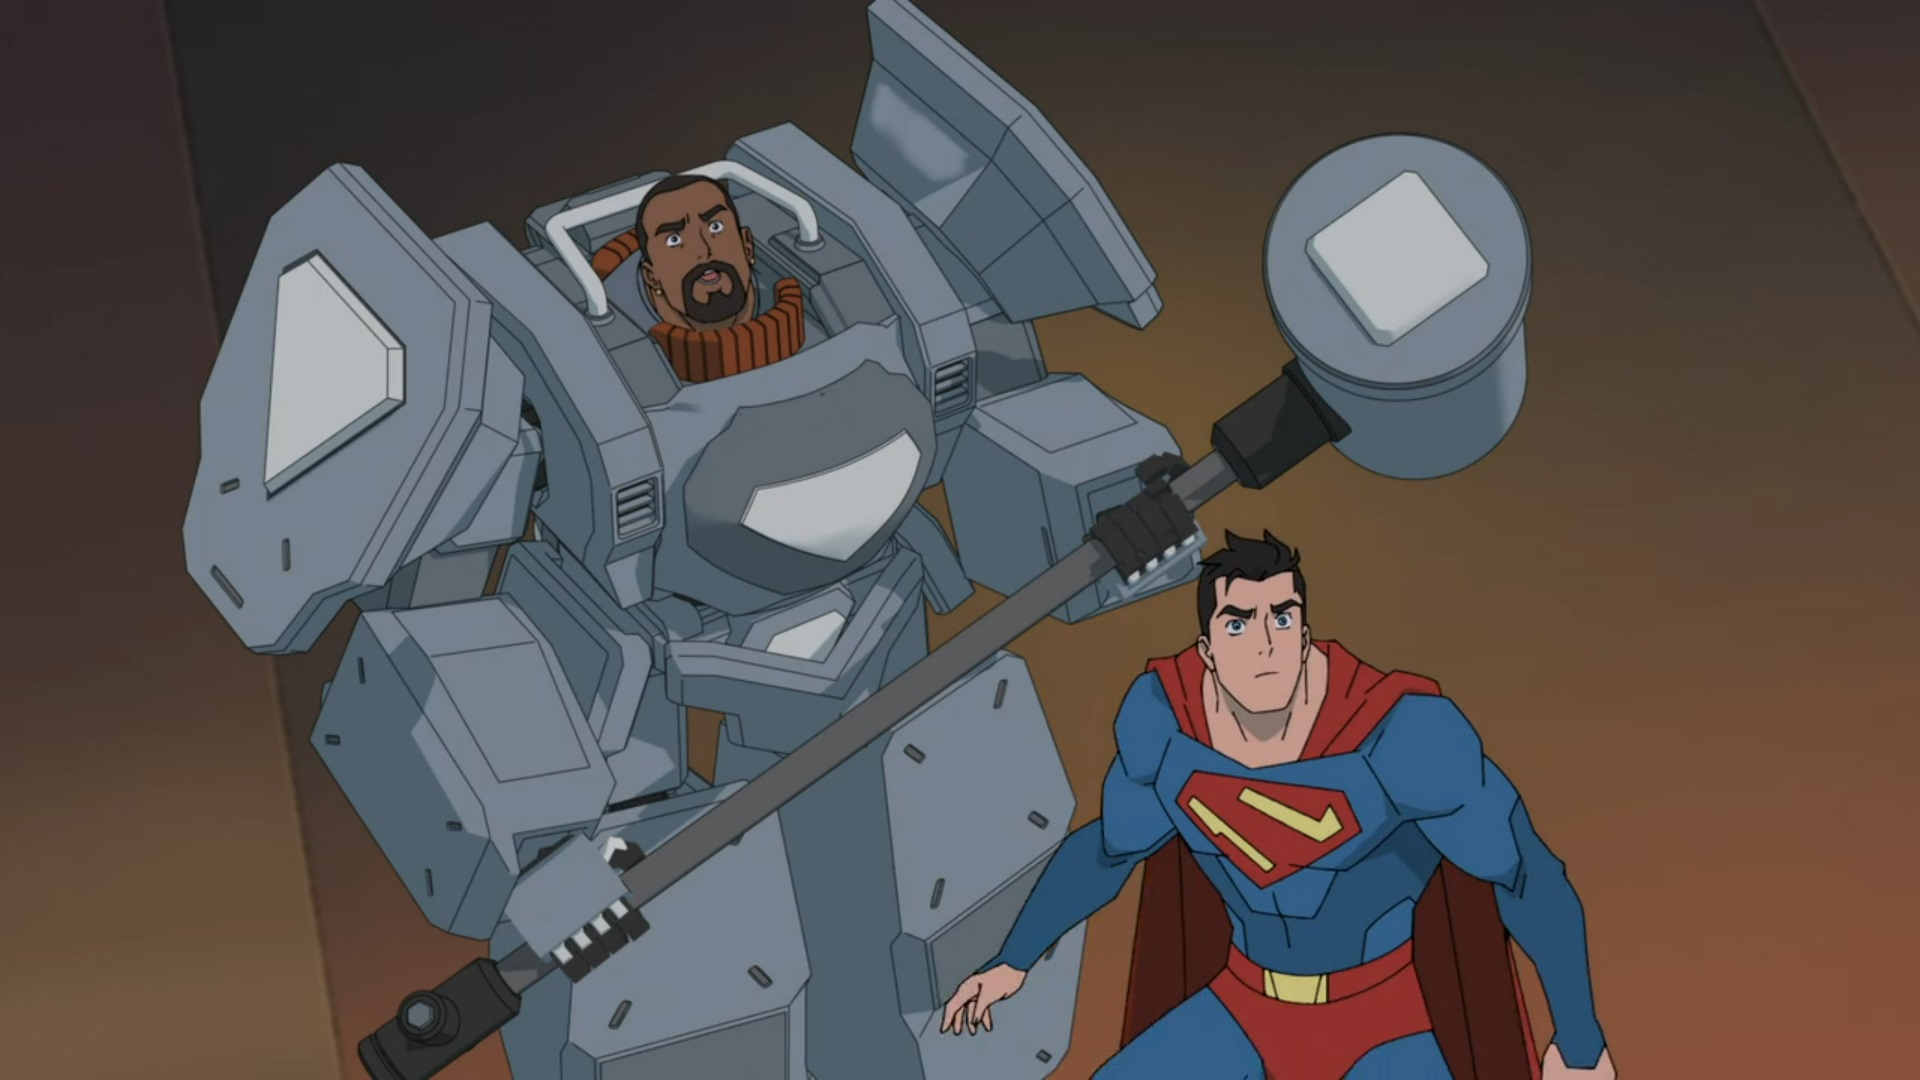 Superman in a stance getting ready to fight with John Henry Irons in his Fullmetal suit standing right behind him. John Henry Irons his holding a metal hammer to show that he is also ready to fight. This battle may not be Superman's hardest battle yet (living with General Lane), but it will be a big battle. 